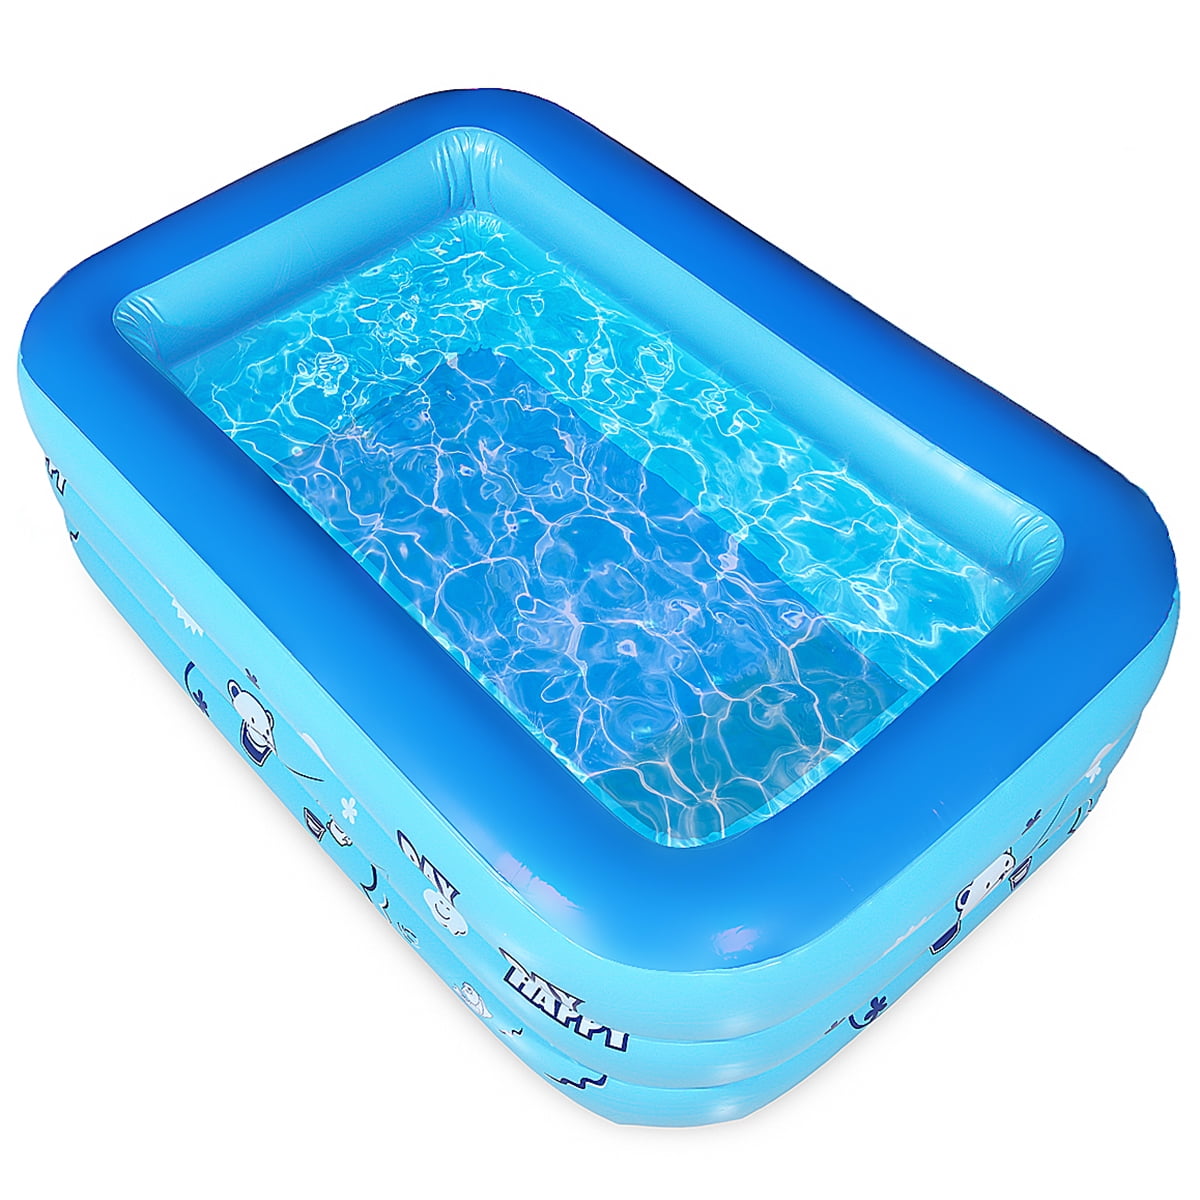 Large 3 Rings Inflatable Swimming Pool with Anti-Slip Soft Floor, Home Garden Swim Paddling Pool Bathing Tub for Summer Outdoor Gift for Adults Kids